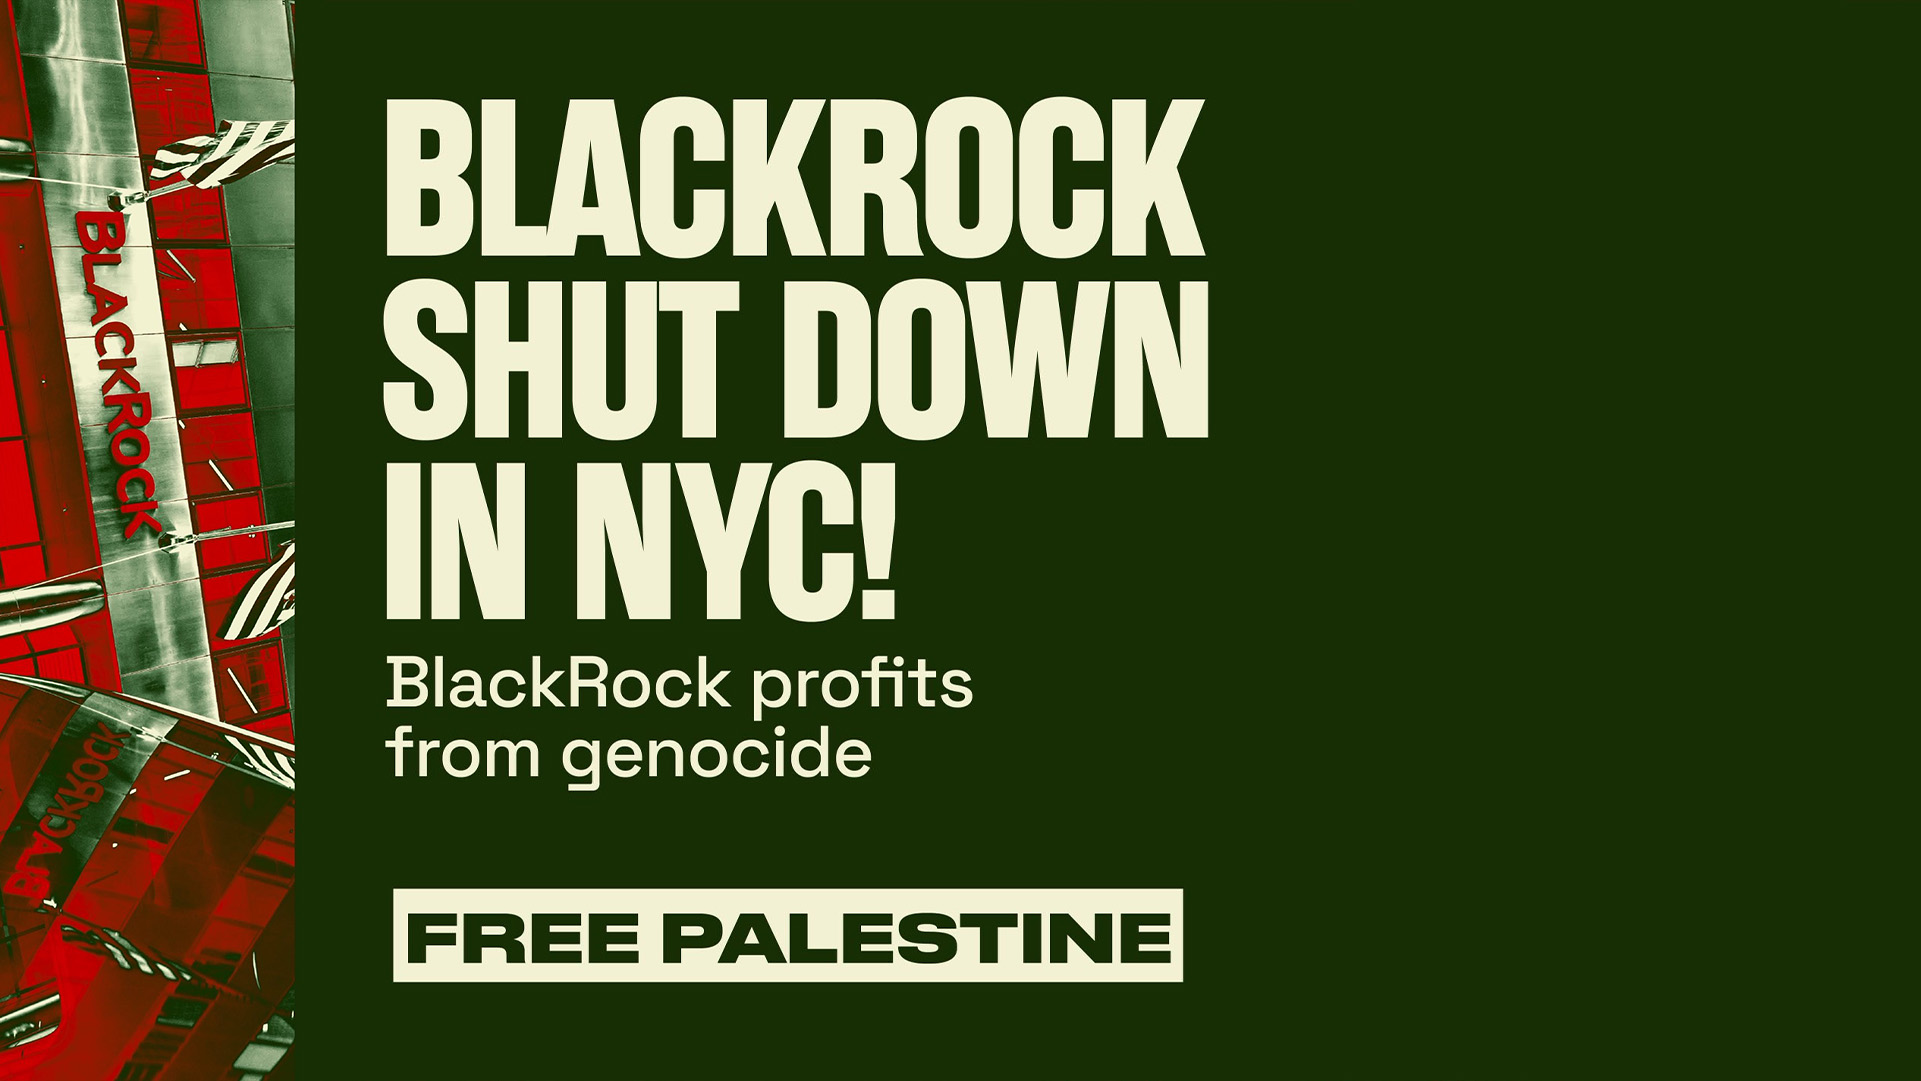 Green banner that reads "Blackrock Shut Down in NYC! BlackRock profits from genocide. FREE PALESTINE!" And a logo that says Shut It Down for Palestine